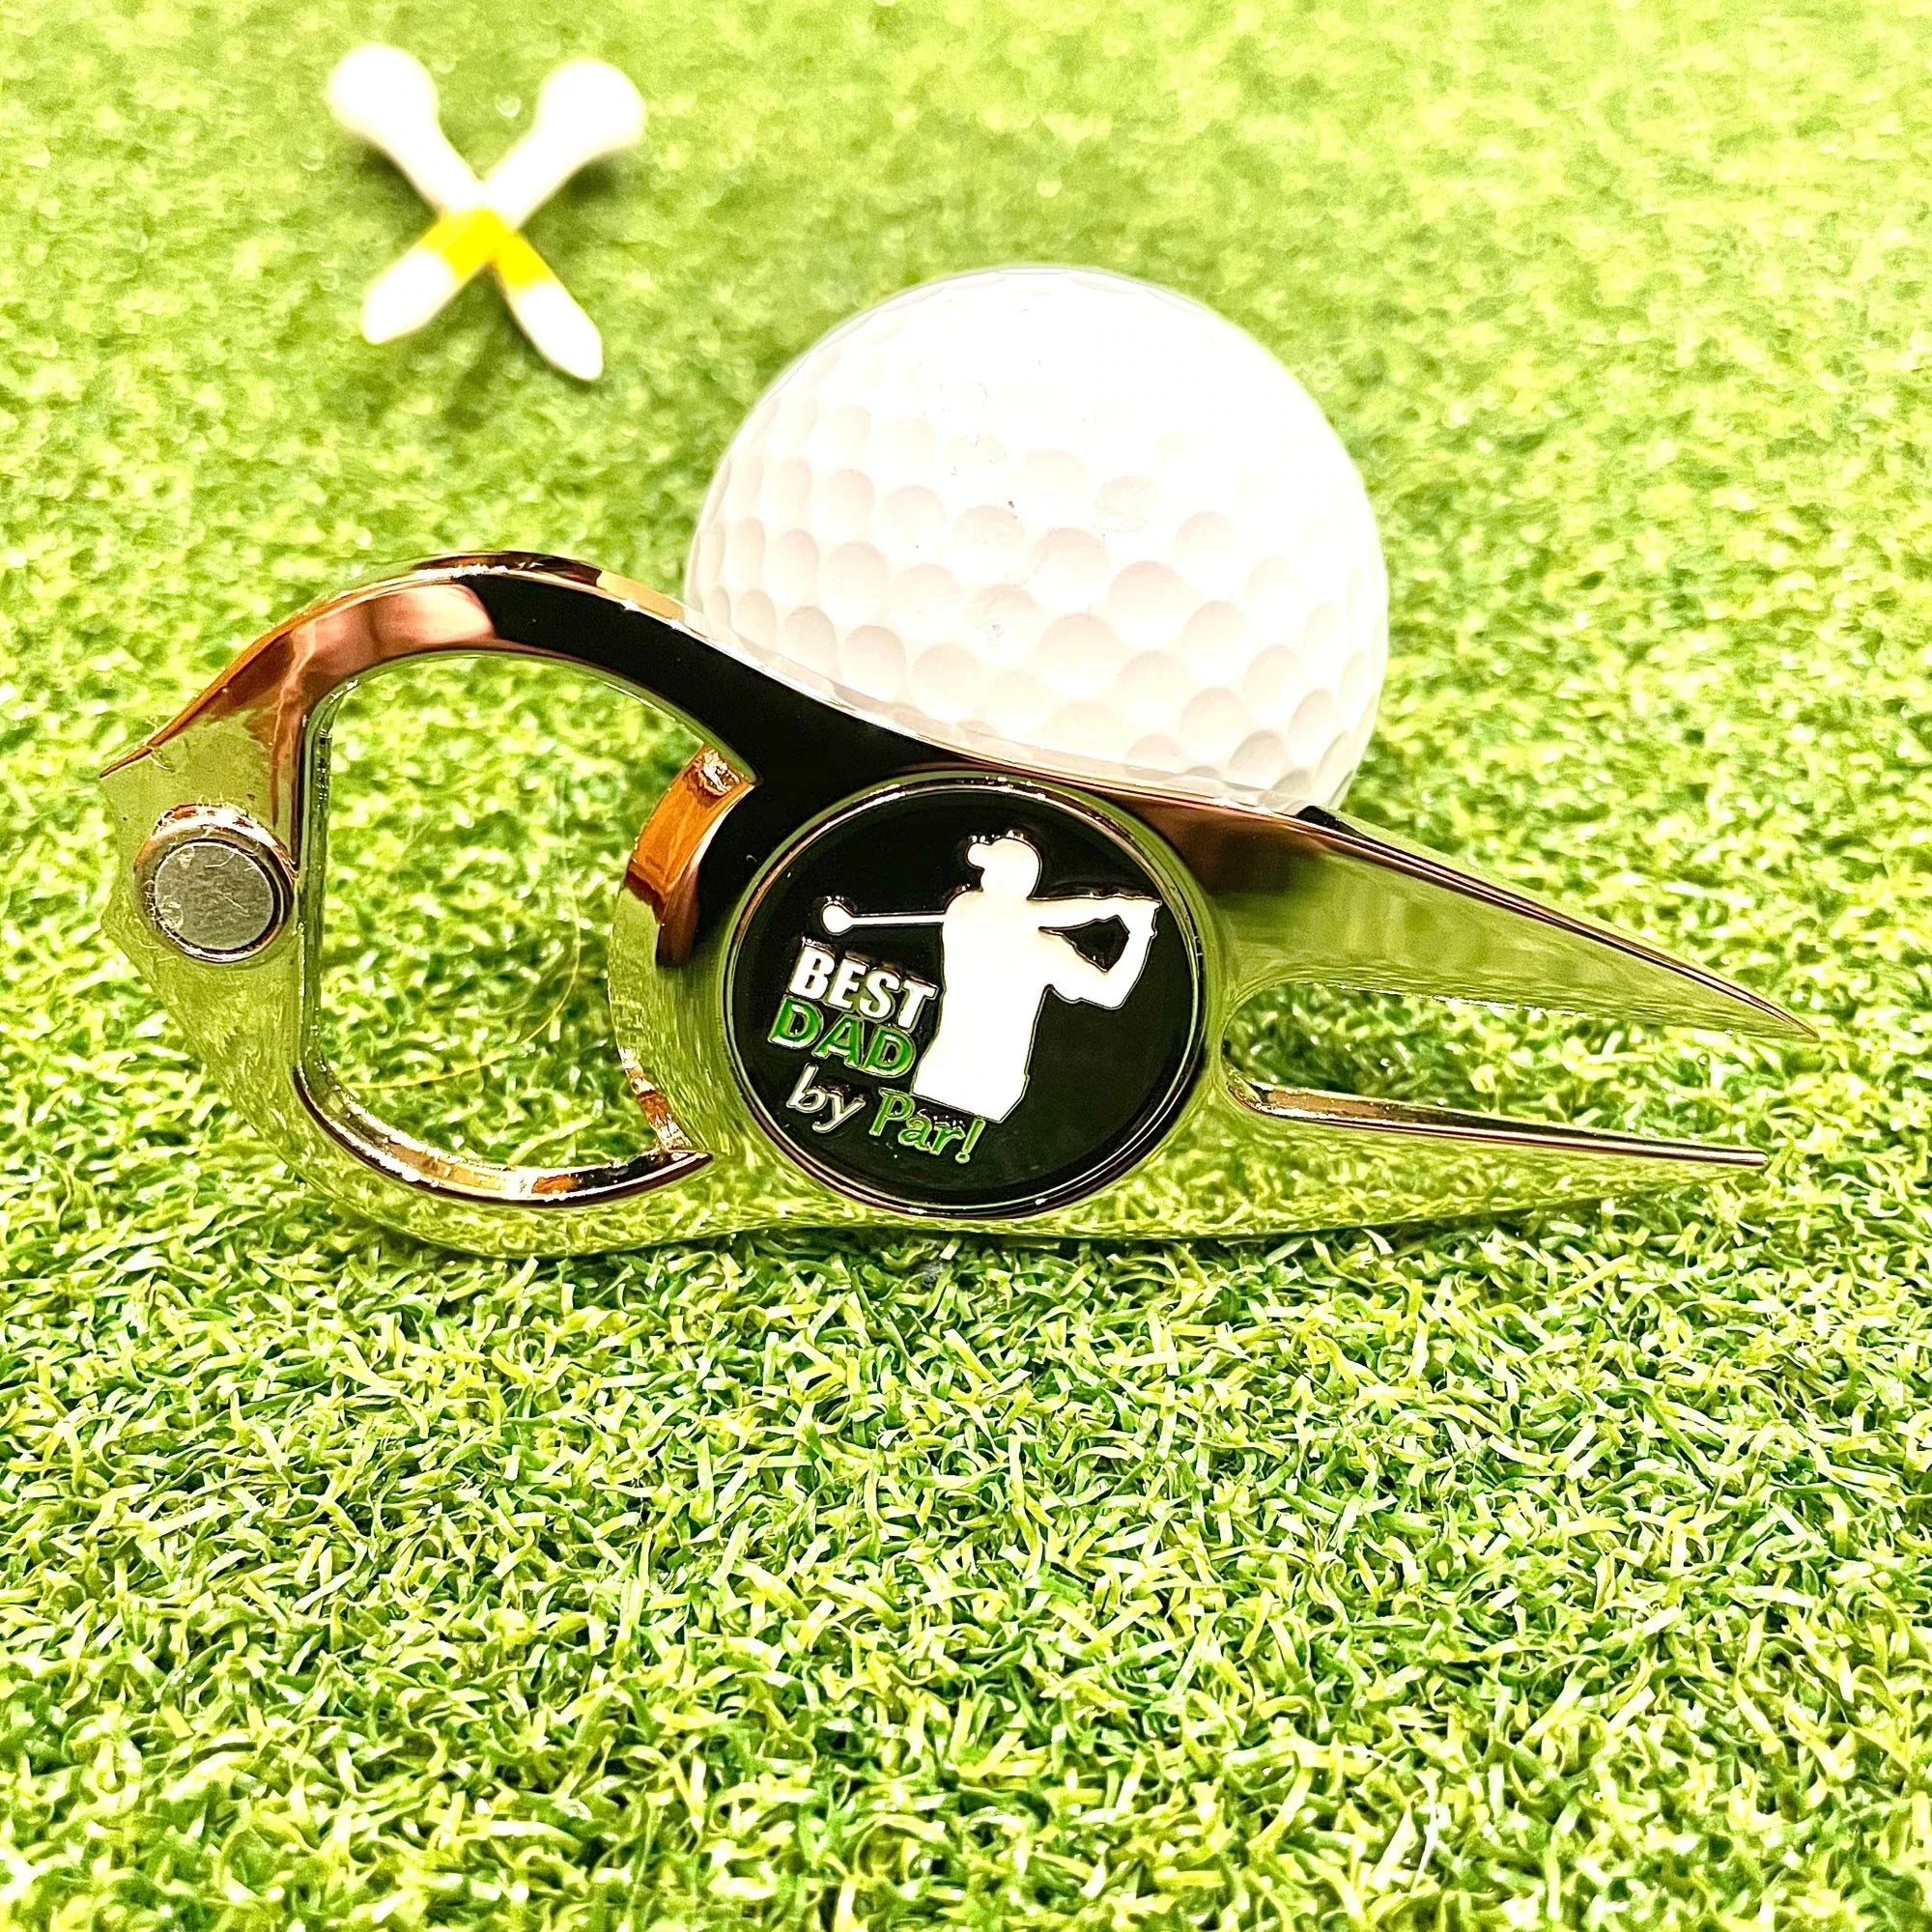 Father's Day Golf Gifts